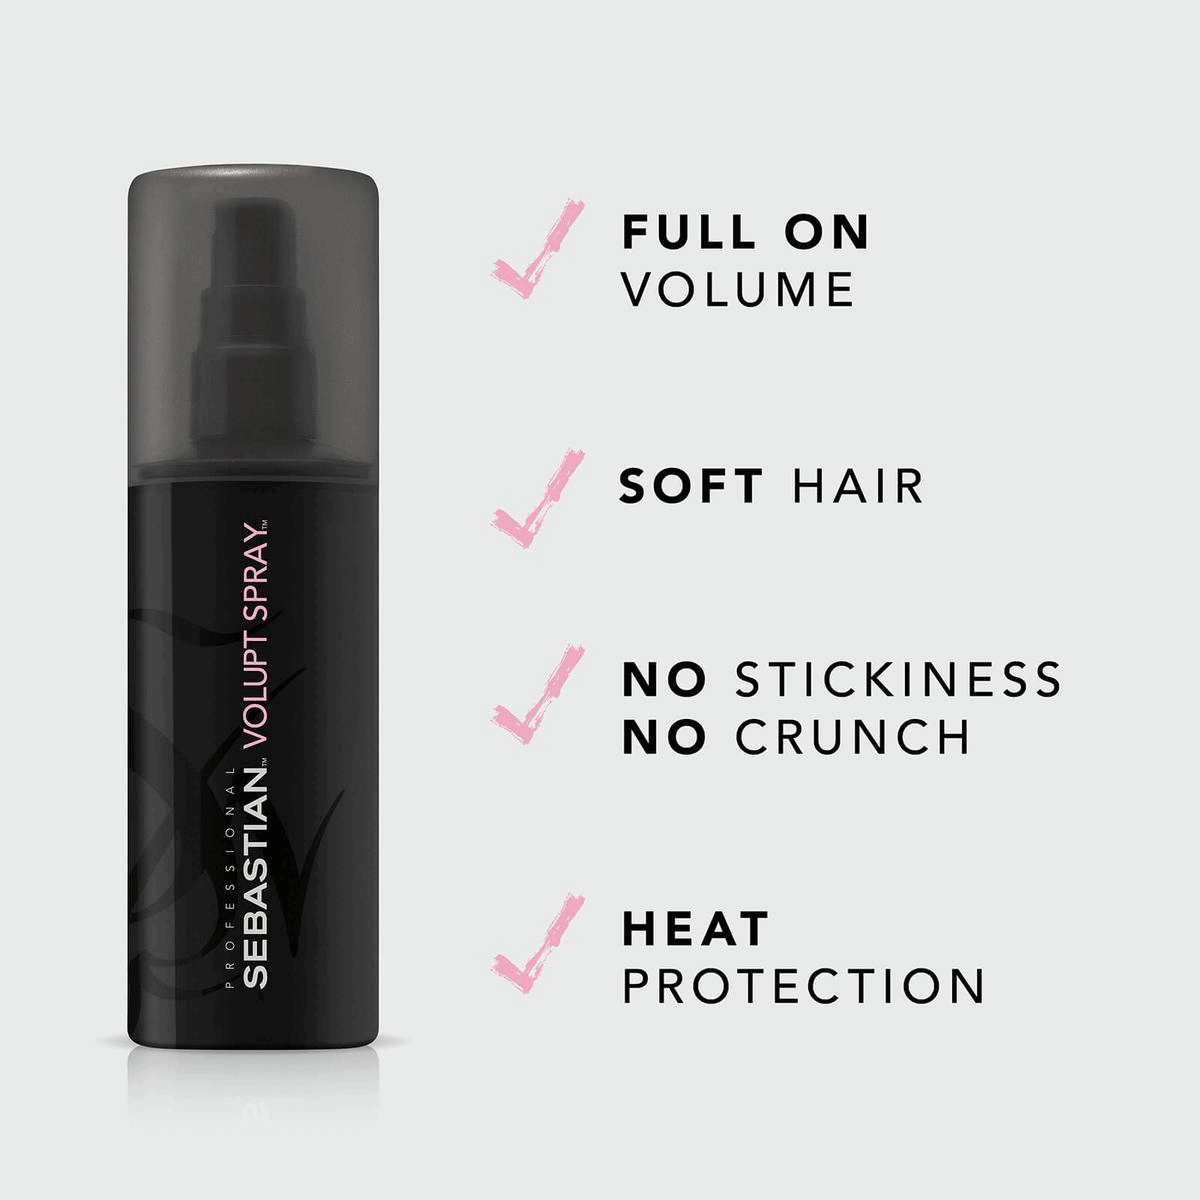 Full on volume Soft hair No stickiness No crunch Heat protection. For extra body Shake Spray Blow-dry. For enhanced waves and curls Shake Spray Air Dry. Combine with Volupt Shampoo & Volupt Conditioner for best results. Challenge
            Find your style* *sold separately. For all hair types